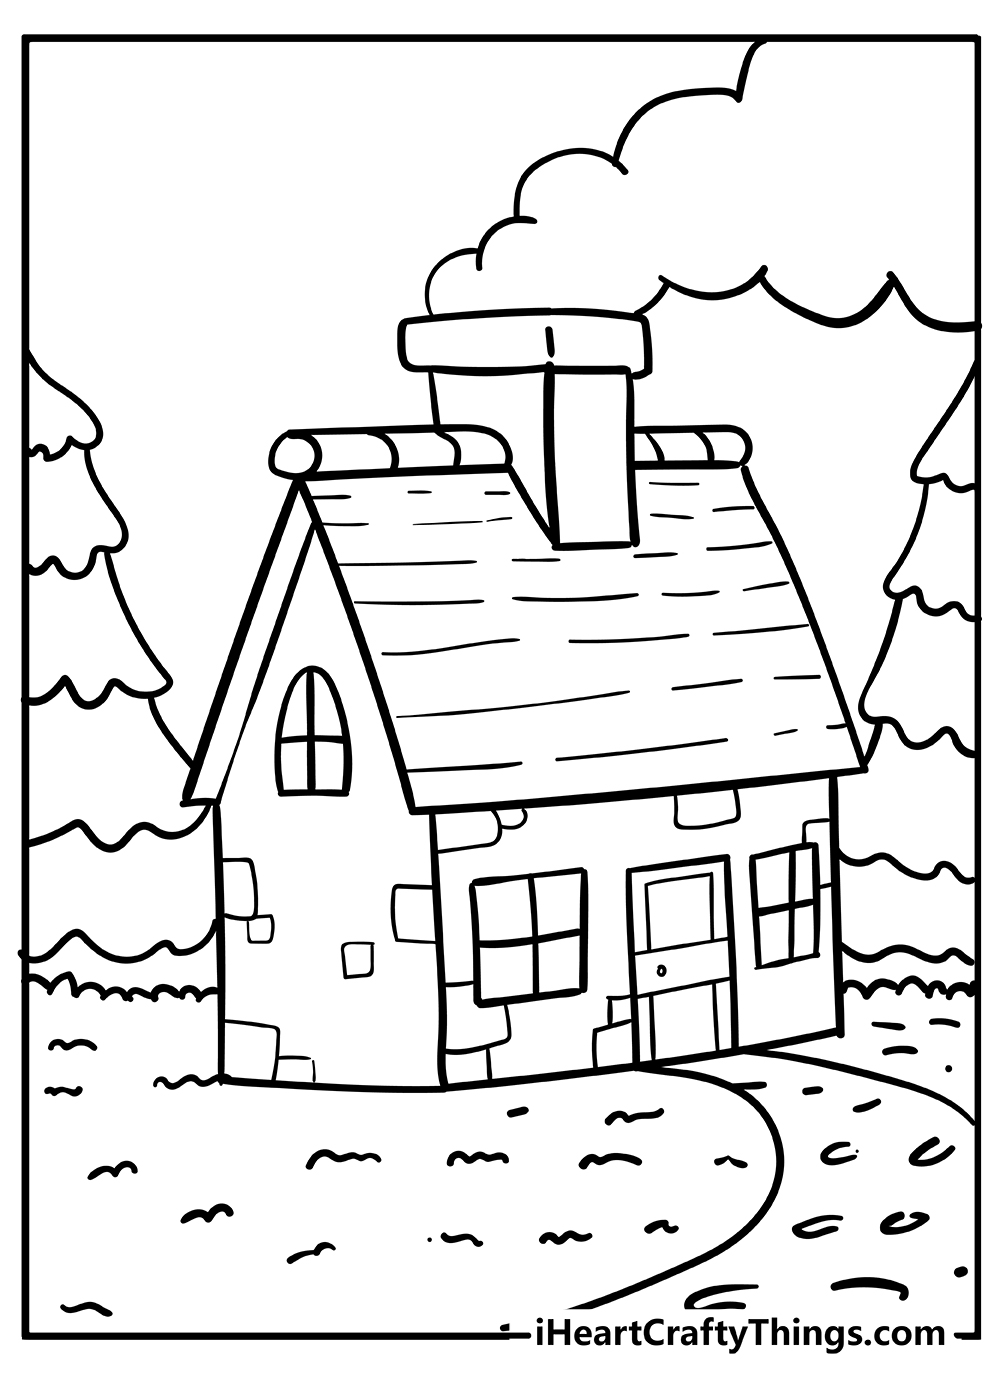 House coloring pages free printables